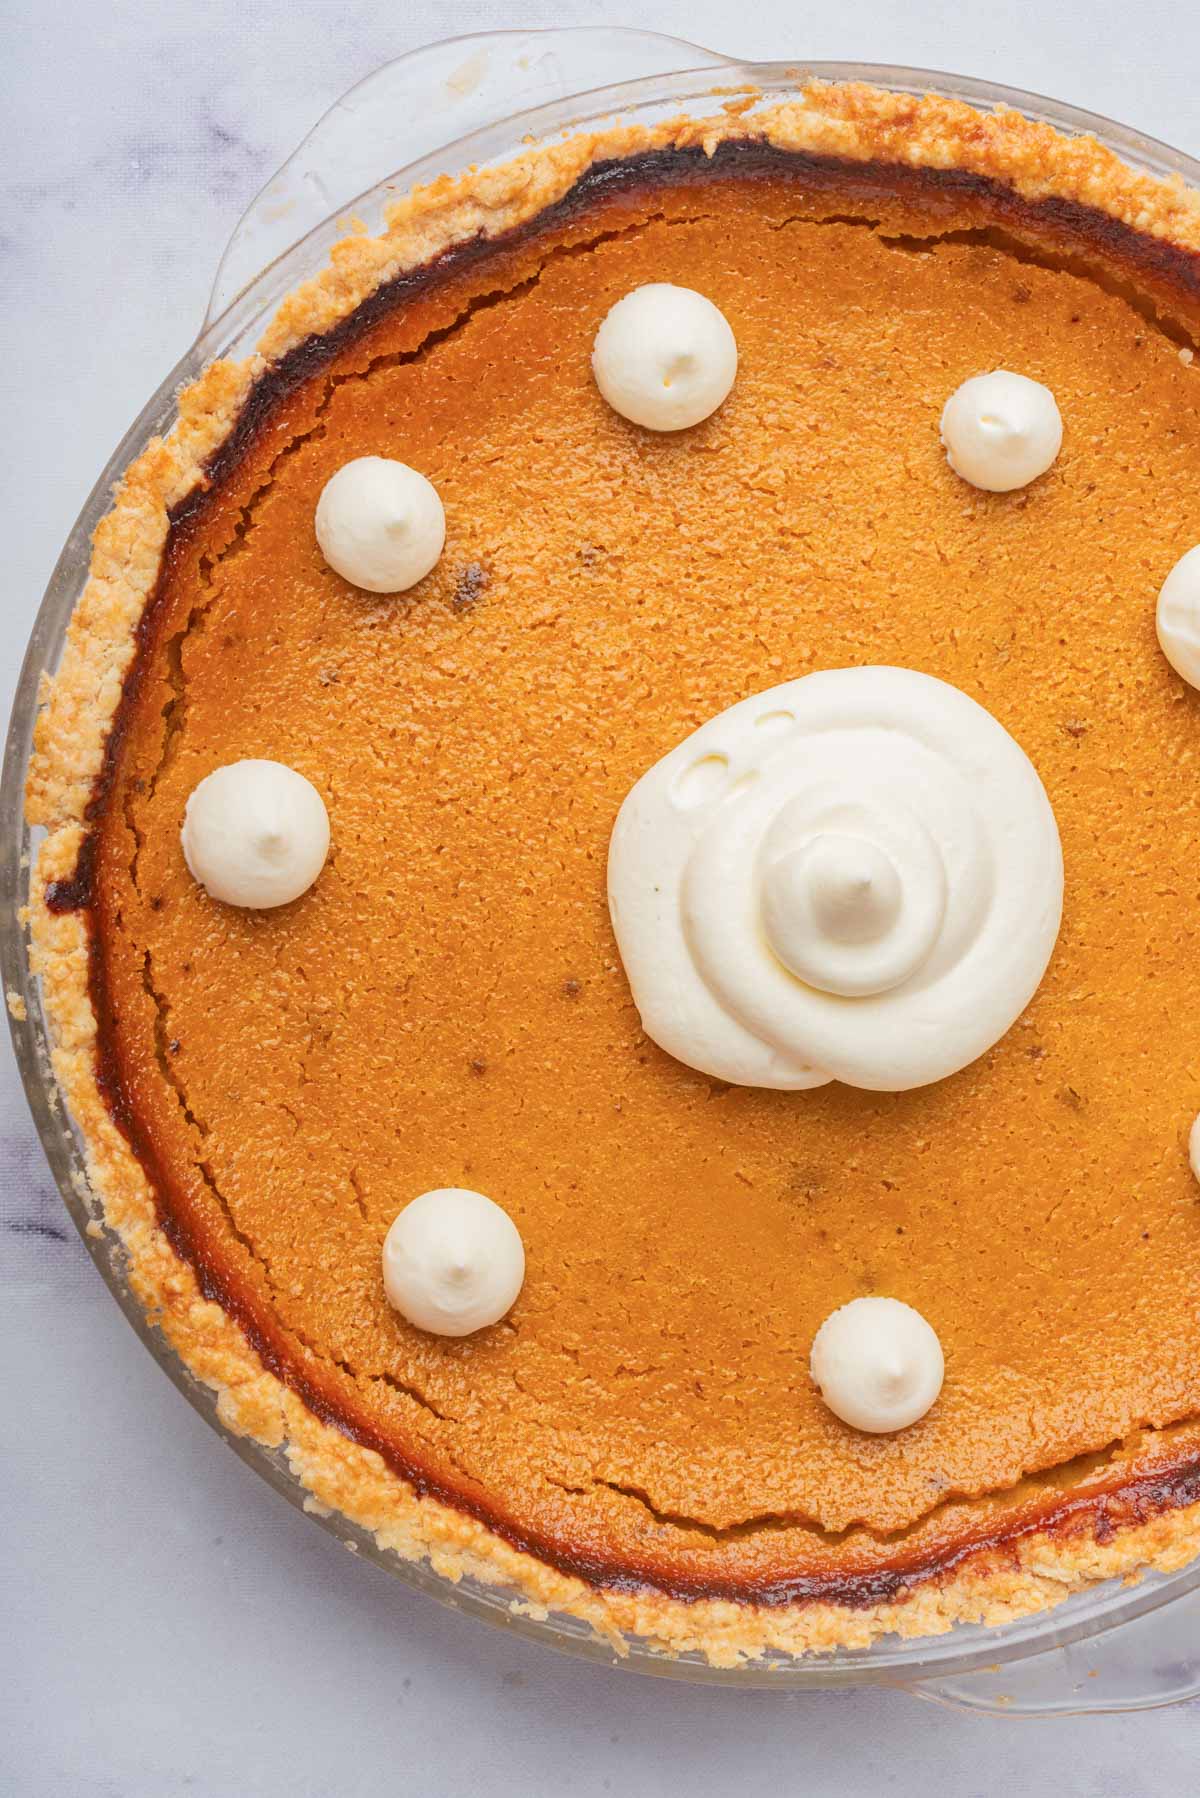 A close-up of a slice of pumpkin pie on a white plate, showcasing the smooth, creamy filling topped with a dollop of whipped cream.